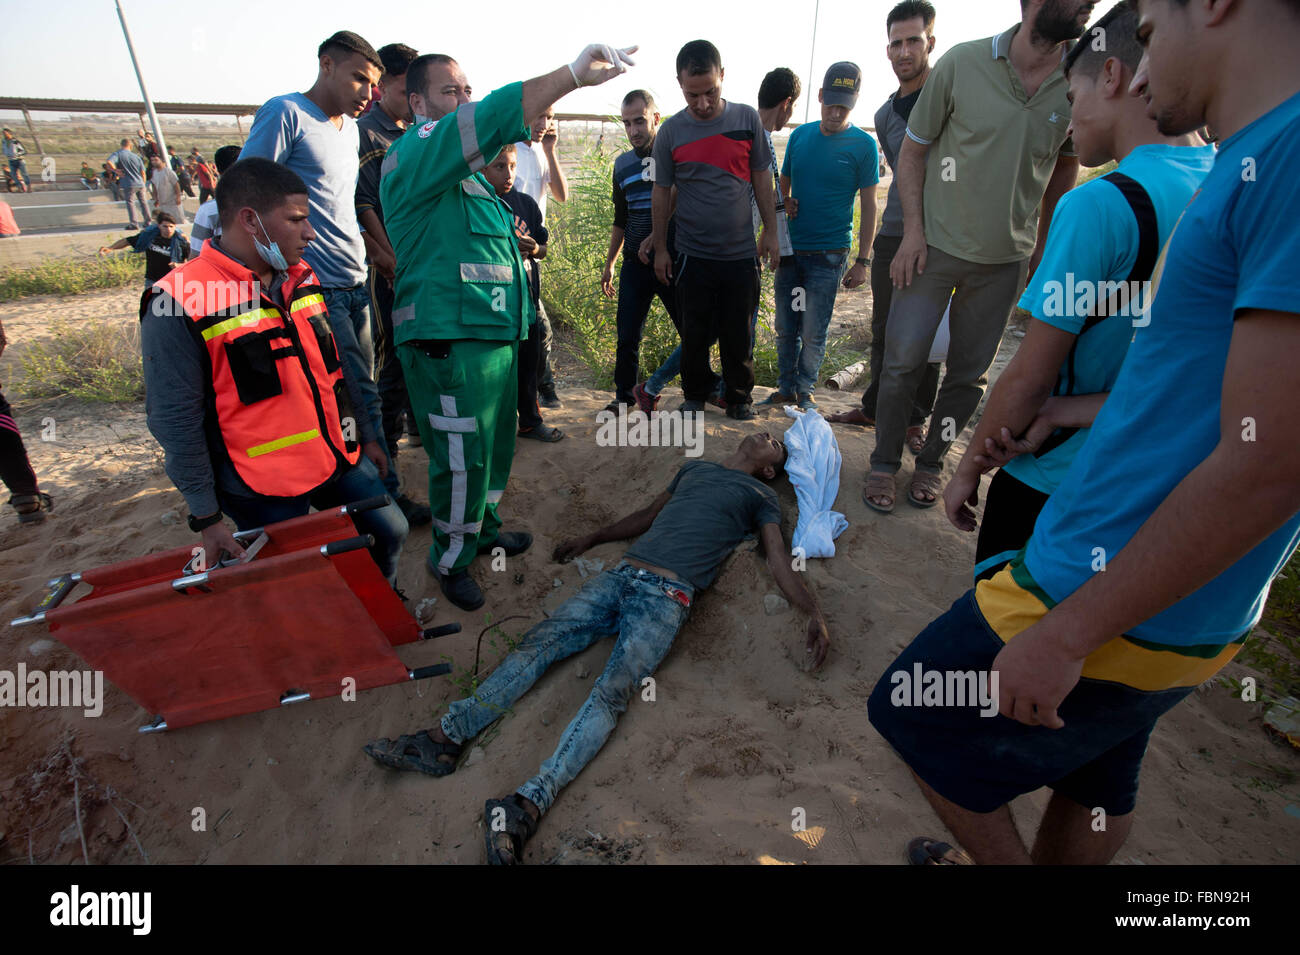 Gaza. october, 2015. Israeli occupation forces cast bombs tear gas at protesters during clashes at the entrance to the Erez crossing between the Gaza Strip and Israel, in the northern Gaza Strip © imagespic/Alamy Live News Stock Photo